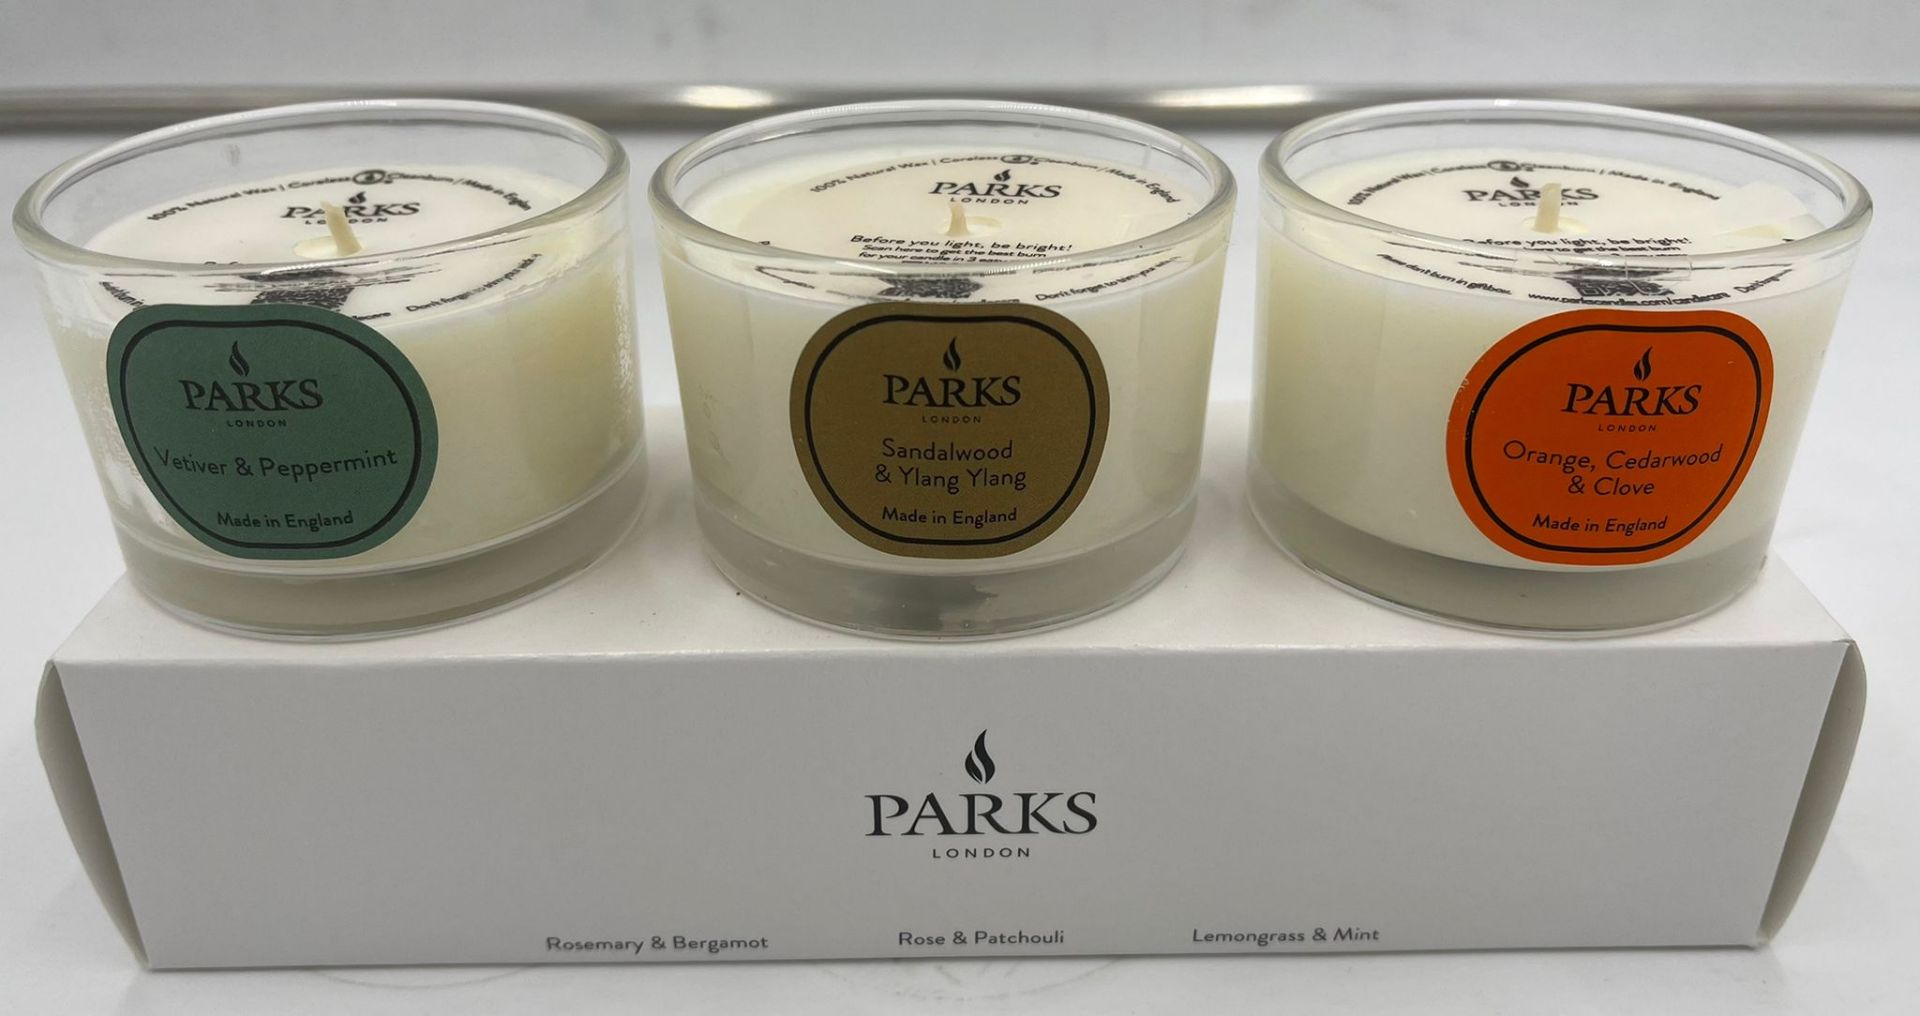 RRP £54 - New Set Of 3 Parks London Scented Candles - Vetiver & Peppermint, Sandalwood & Ylang